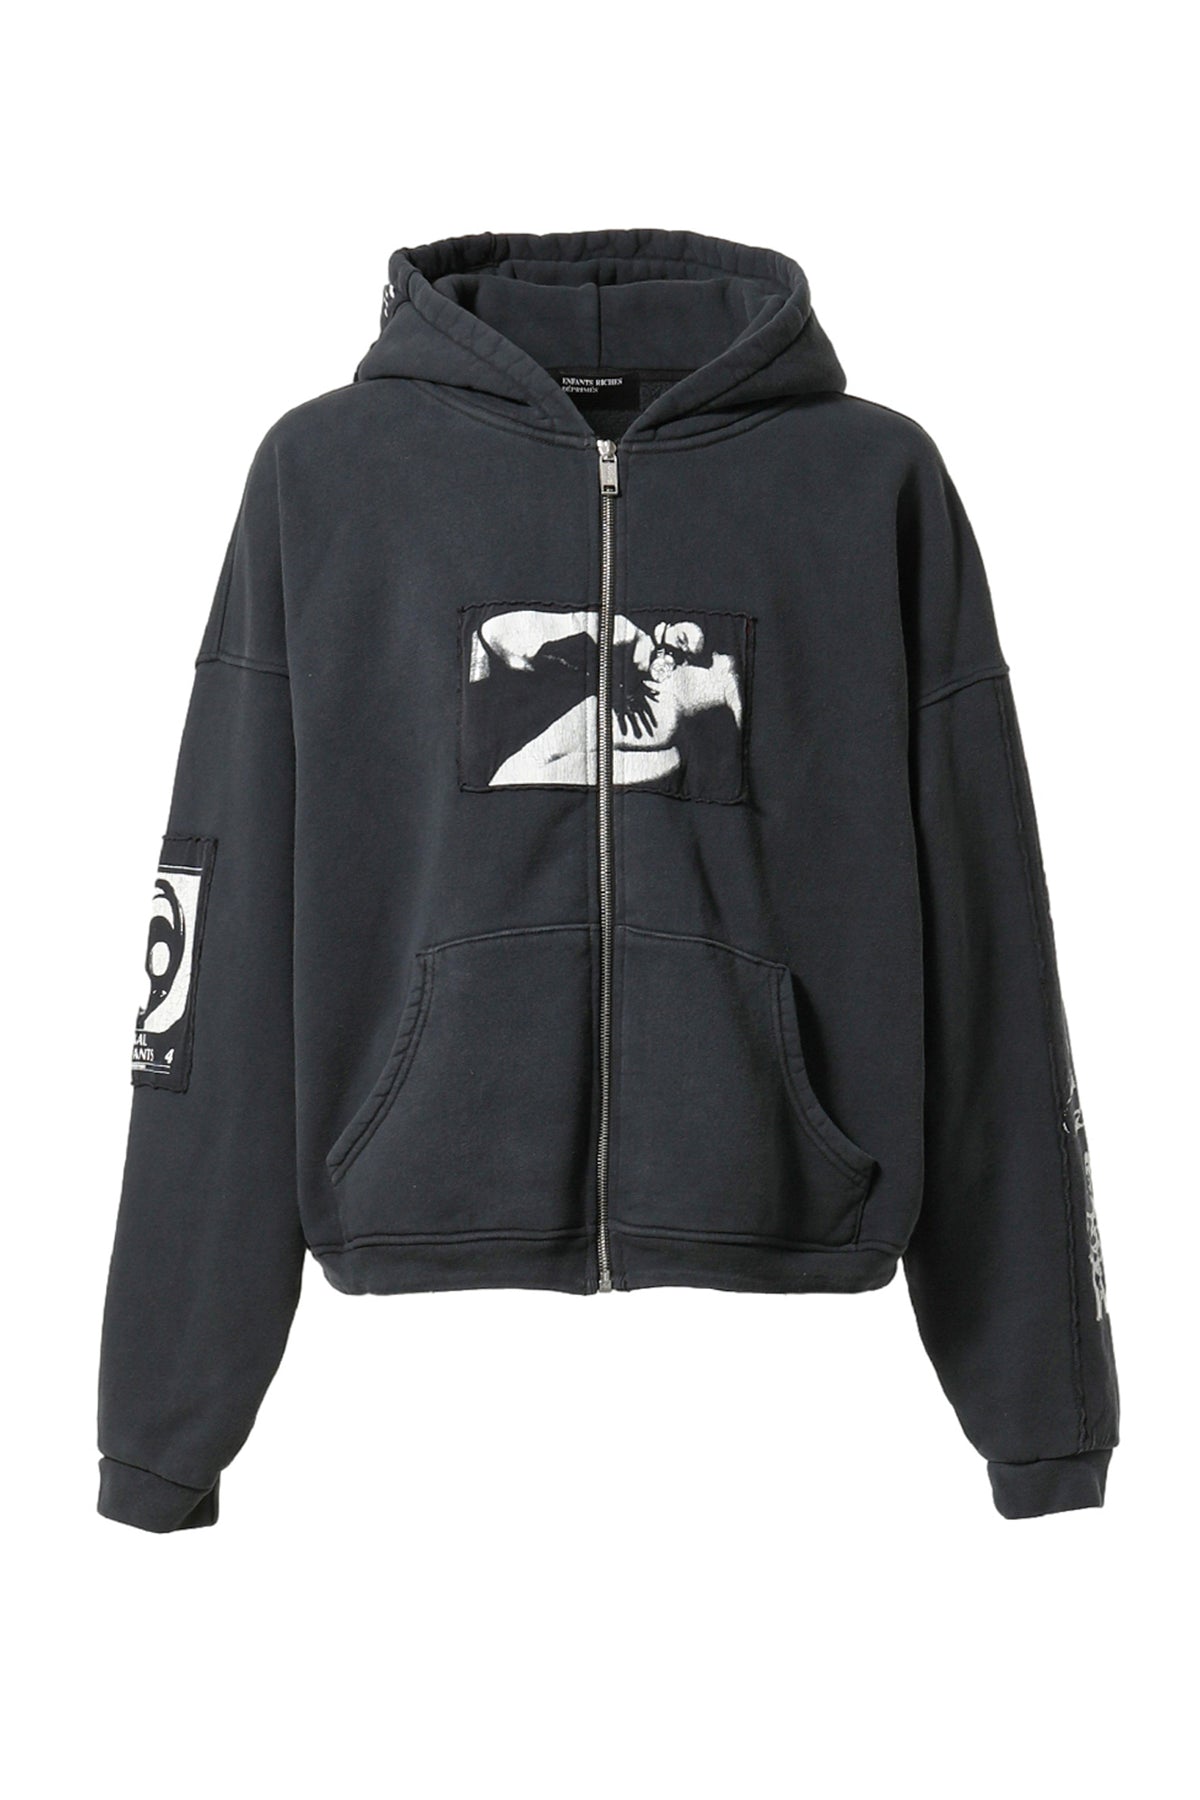 GAS MASK ASSEMBLAGE ZIP HOODIE / FADED BLK